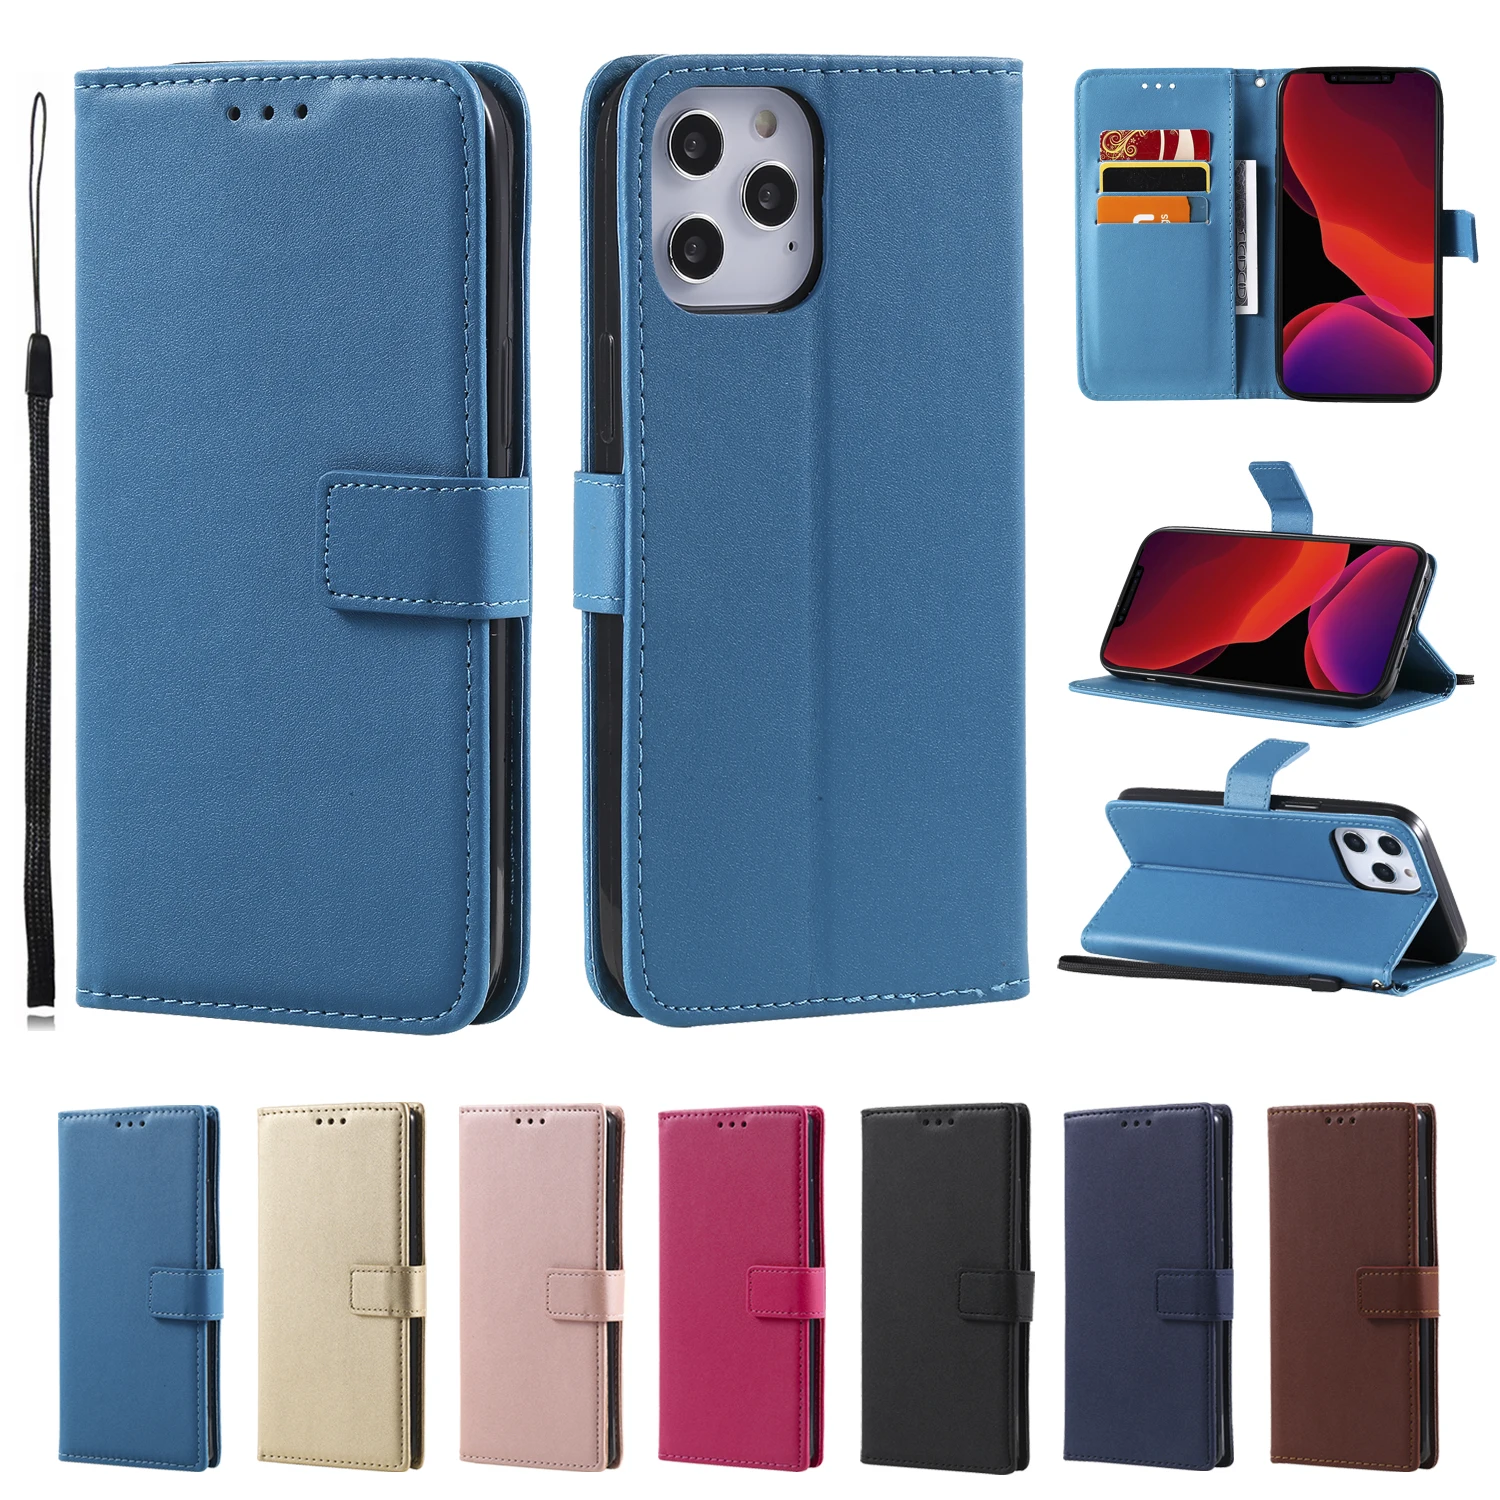 

PU Leather Wallet Phone Case For Sony Z3 Z4 Z5 Mini M2 M4 M5 E4 E5 E6 Sony XZ1 XA XA2 L1 L2 Flip Card Slots Holder Stand Cover